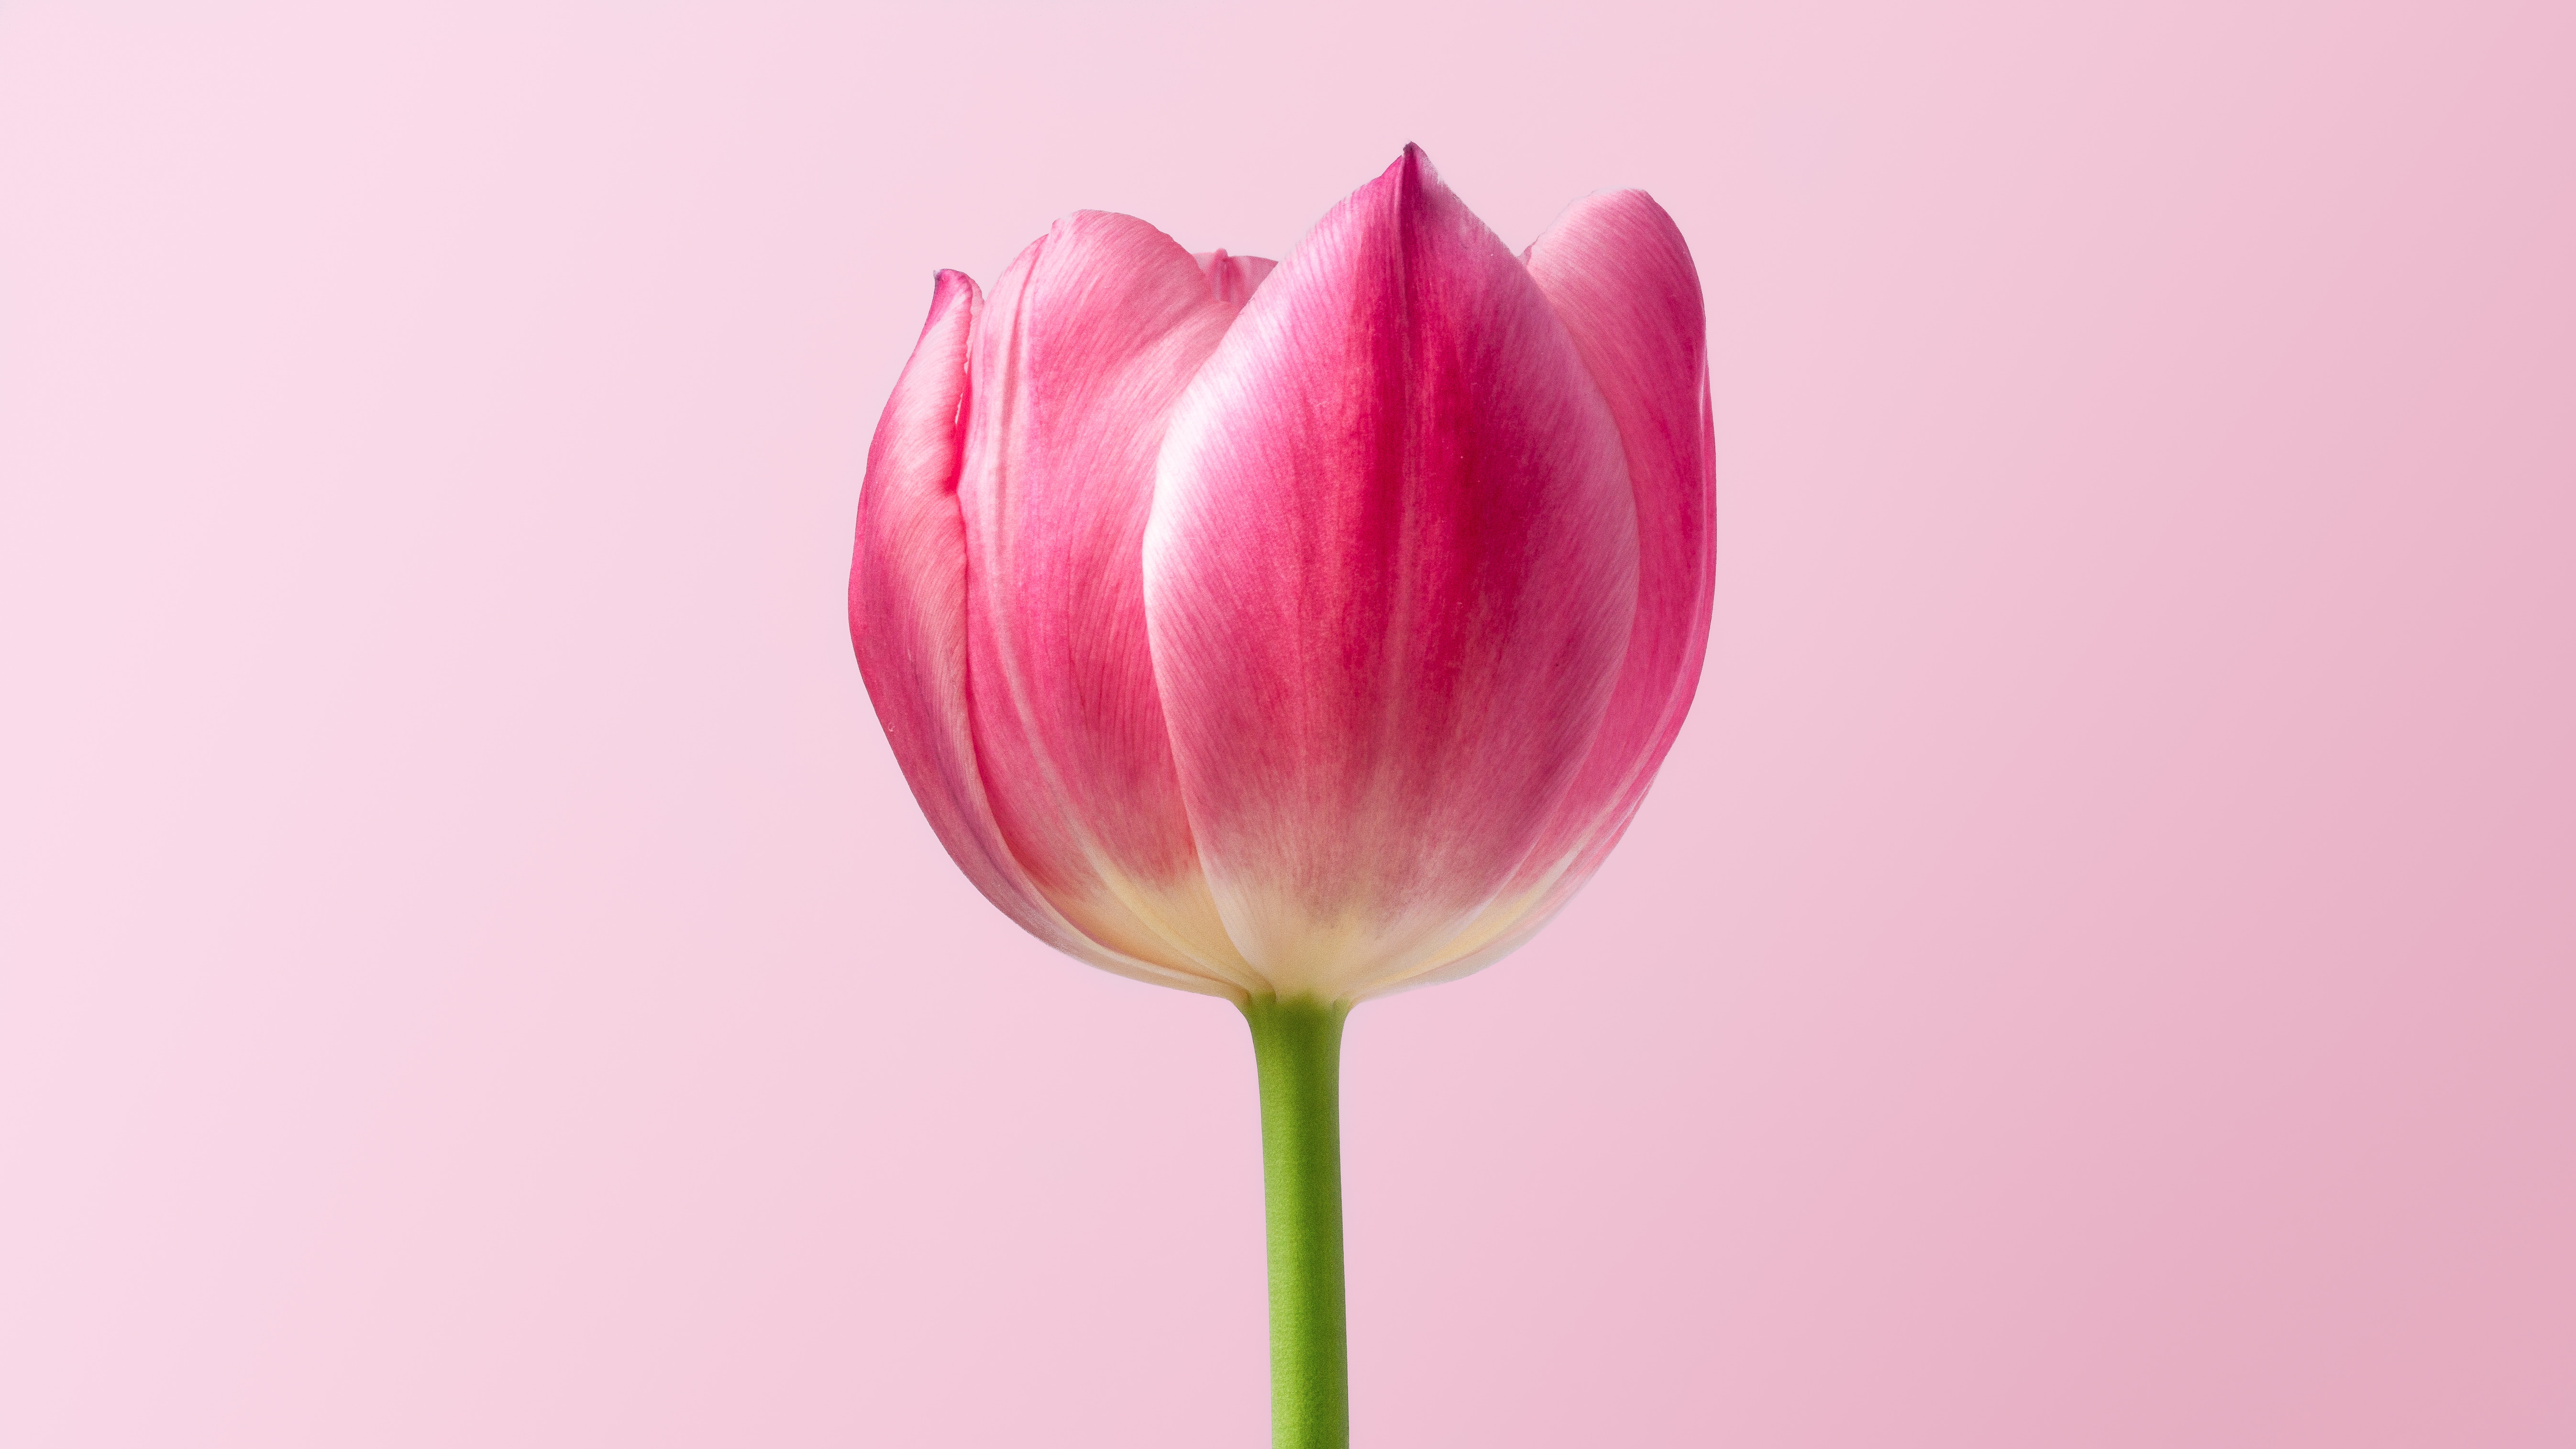 Picalls.com | Pink tulip by Dlanor S.